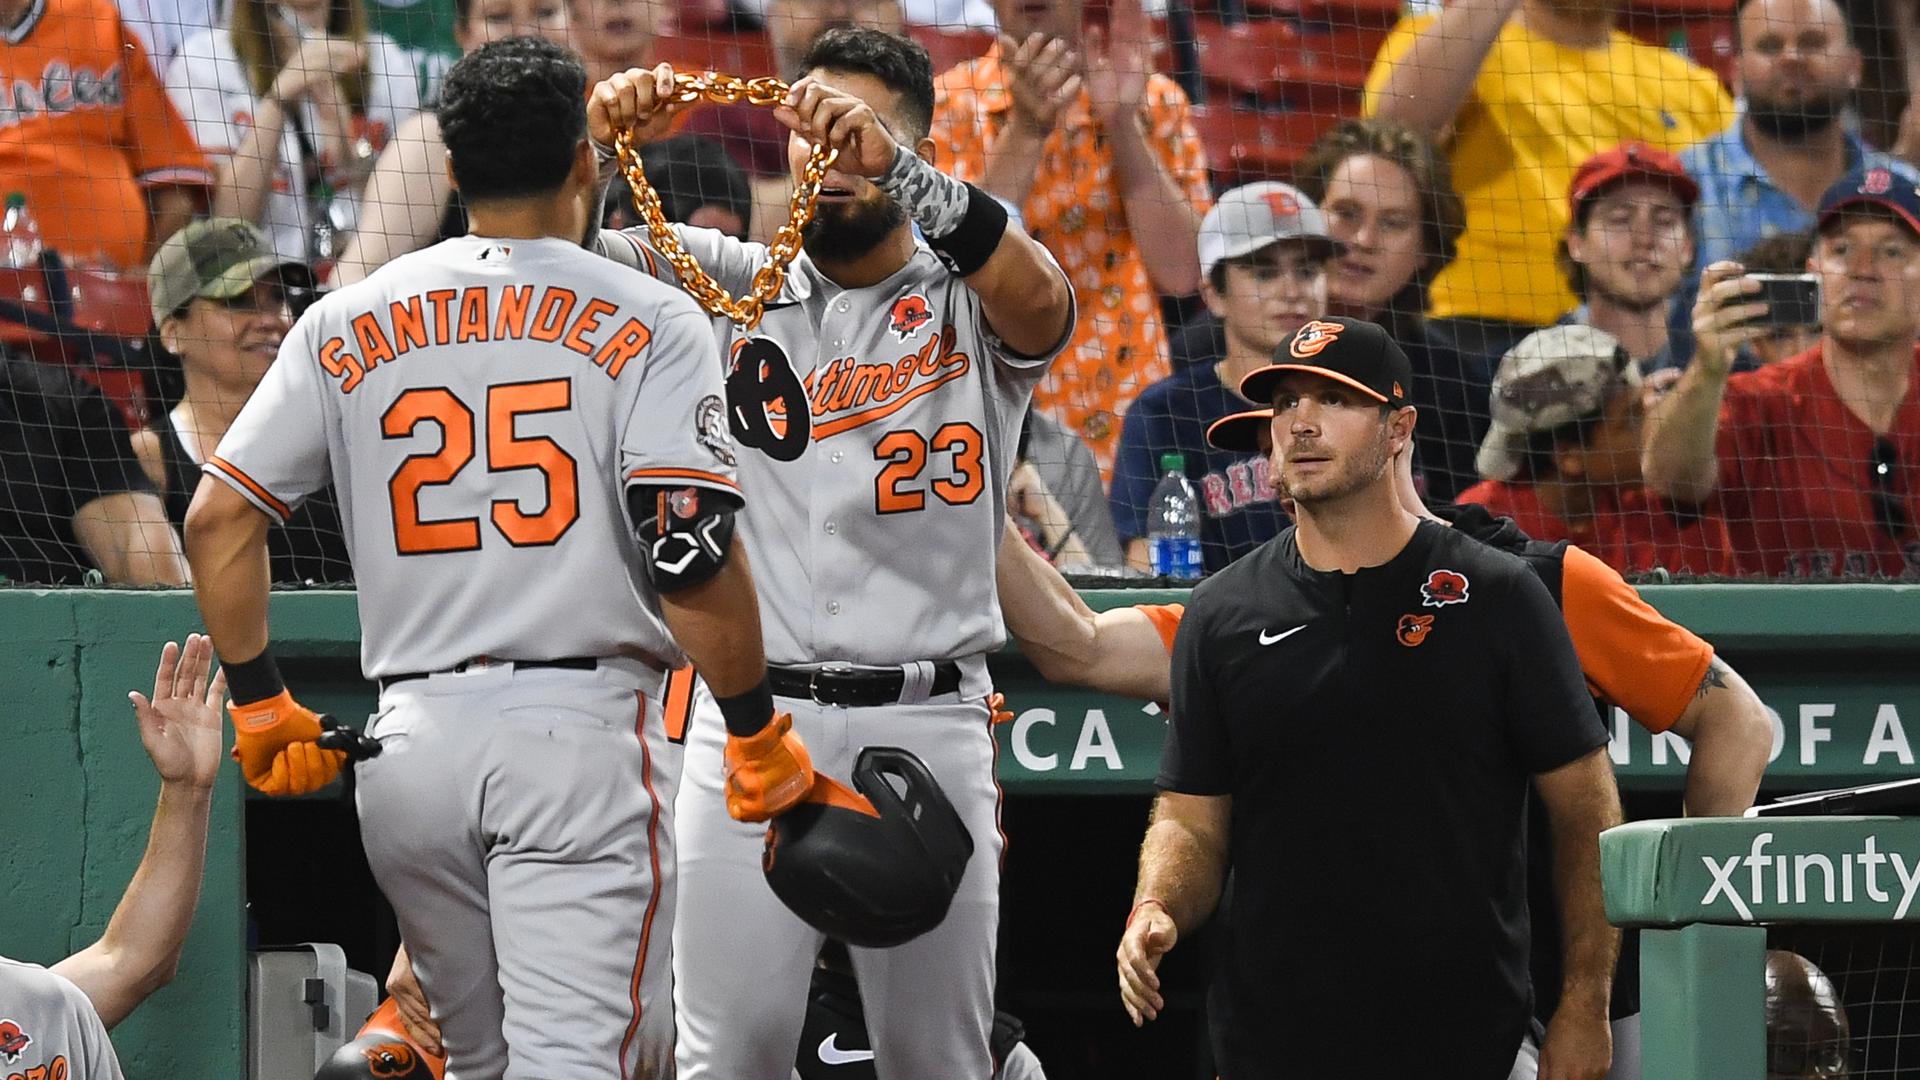 Orioles players celebrate after a home run